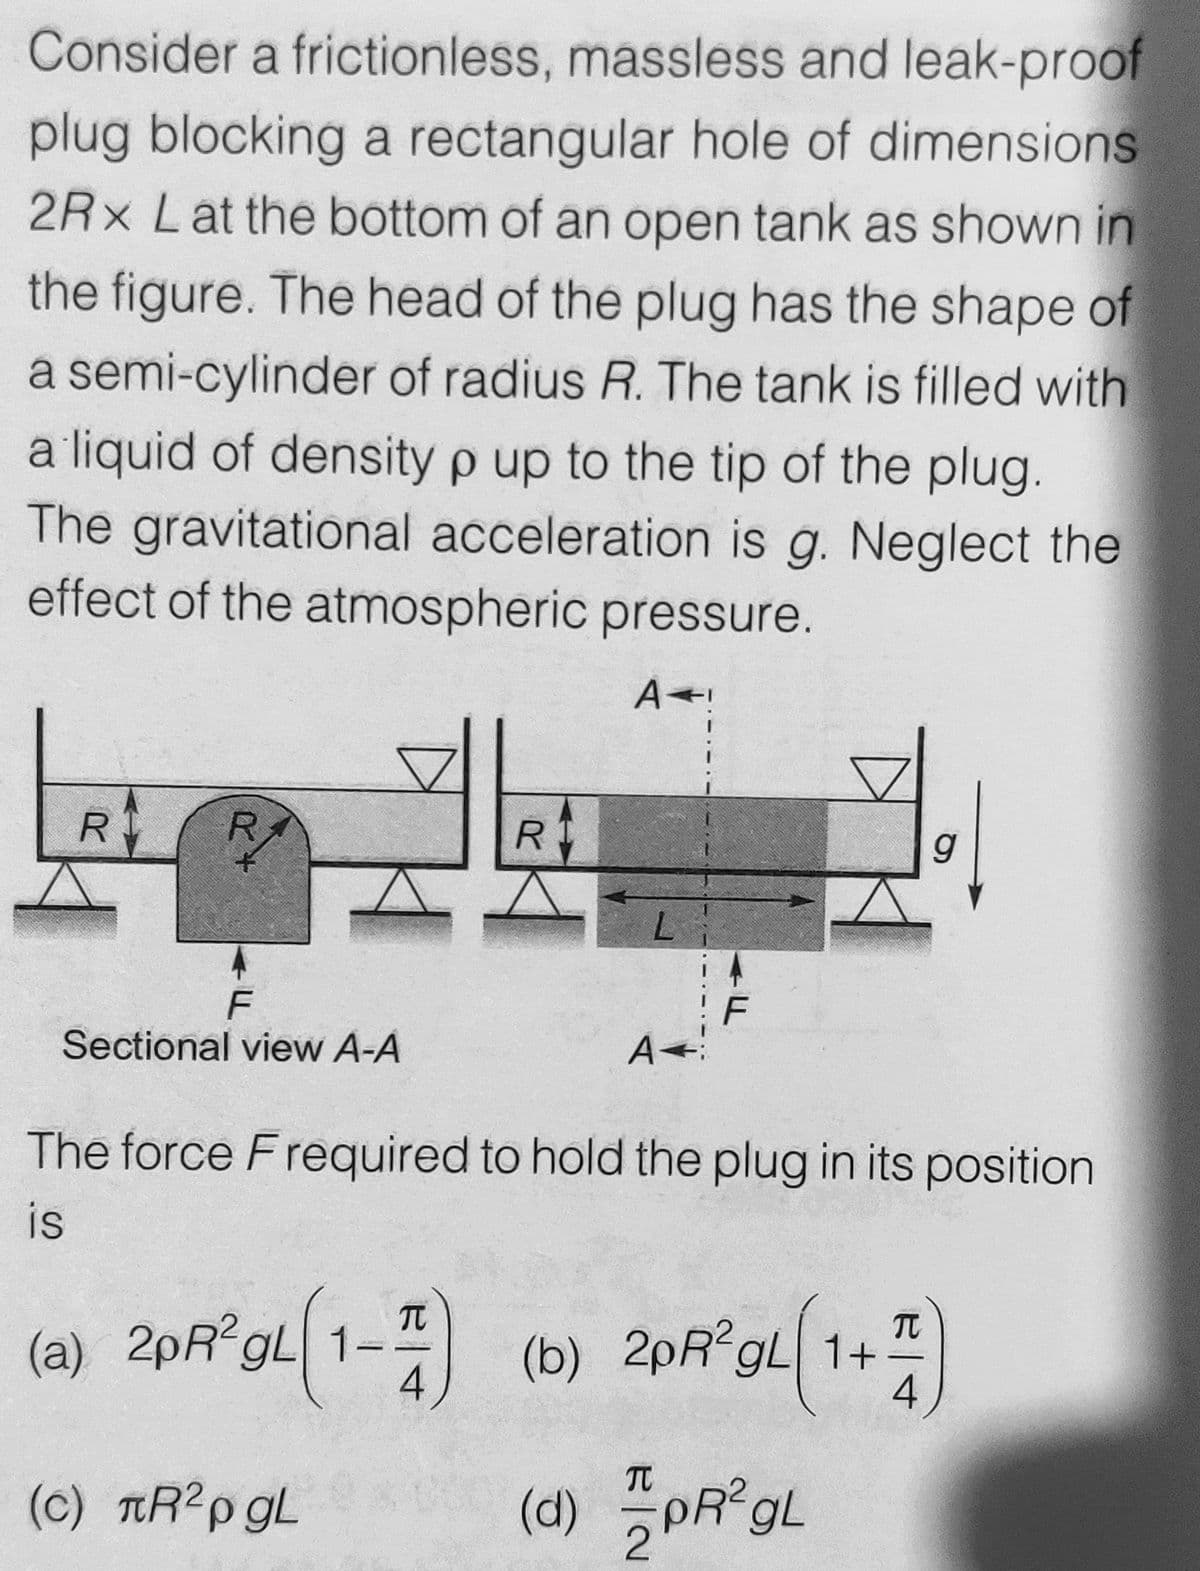 Consider a frictionless, massless and leak-proof
plug blocking a rectangular hole of dimensions
2Rx Lat the bottom of an open tank as shown in
the figure. The head of the plug has the shape of
a semi-cylinder of radius R. The tank is filled with
a liquid of density p up to the tip of the plug.
The gravitational acceleration is g. Neglect the
effect of the atmospheric pressure.
R
R
g
F
Sectional view A-A
A
The force F required to hold the plug in its position
is
(a) 2pR gL 1- (b) 2pR gL 1+
4
4
TC
(c) TR?p gL
(d)
PR gL
